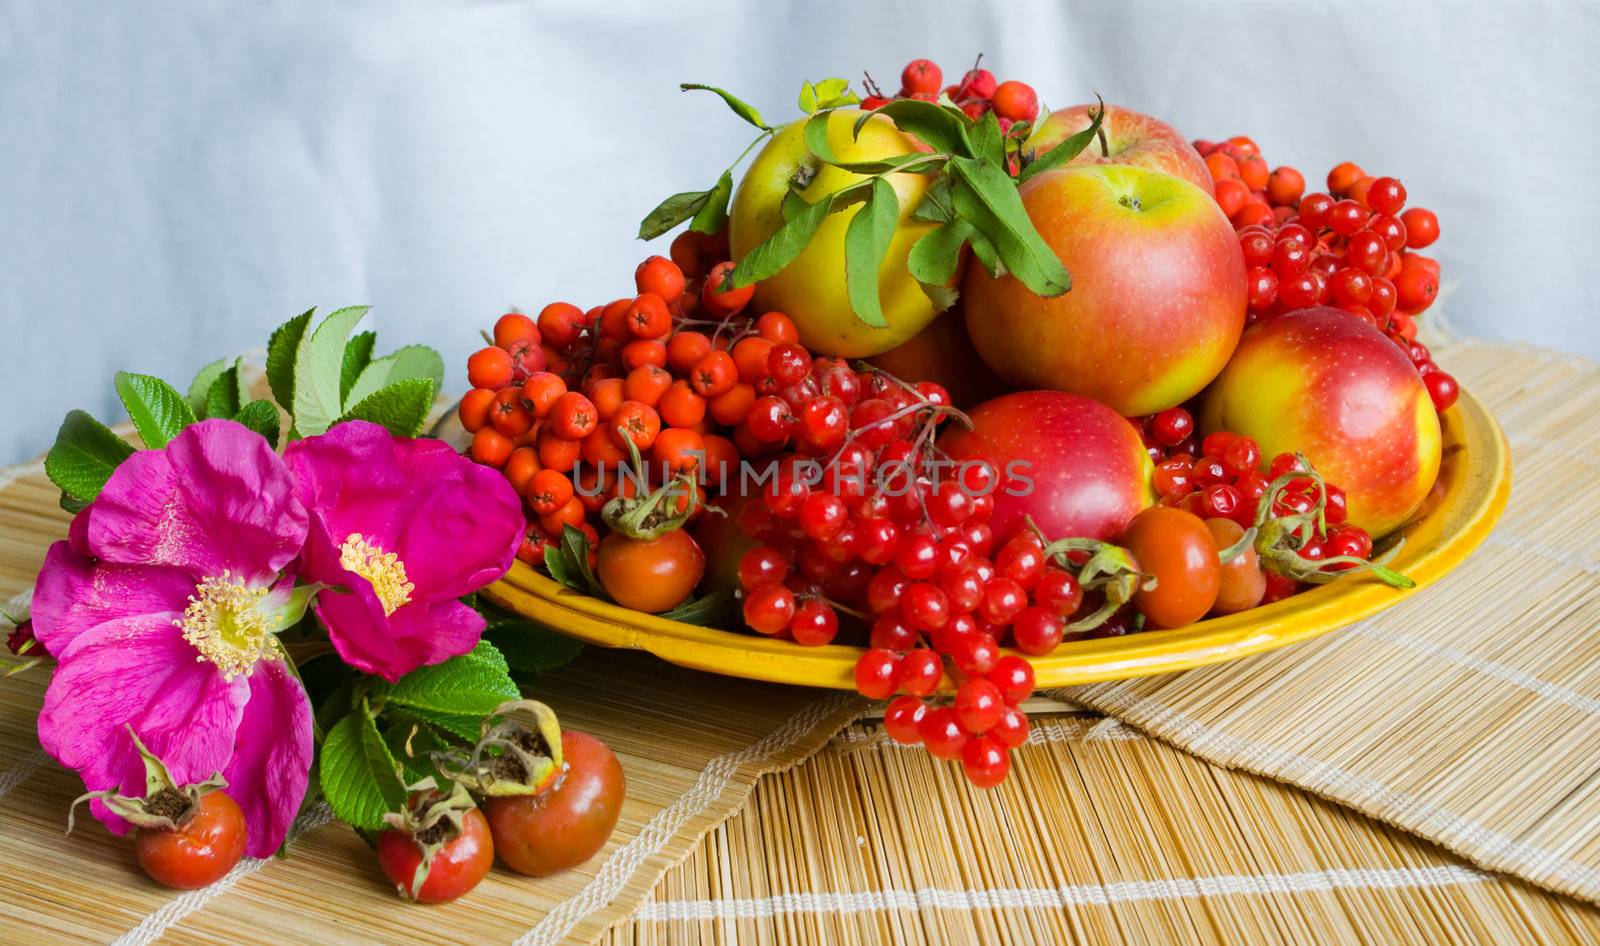 The image of a plate with autumn fruits